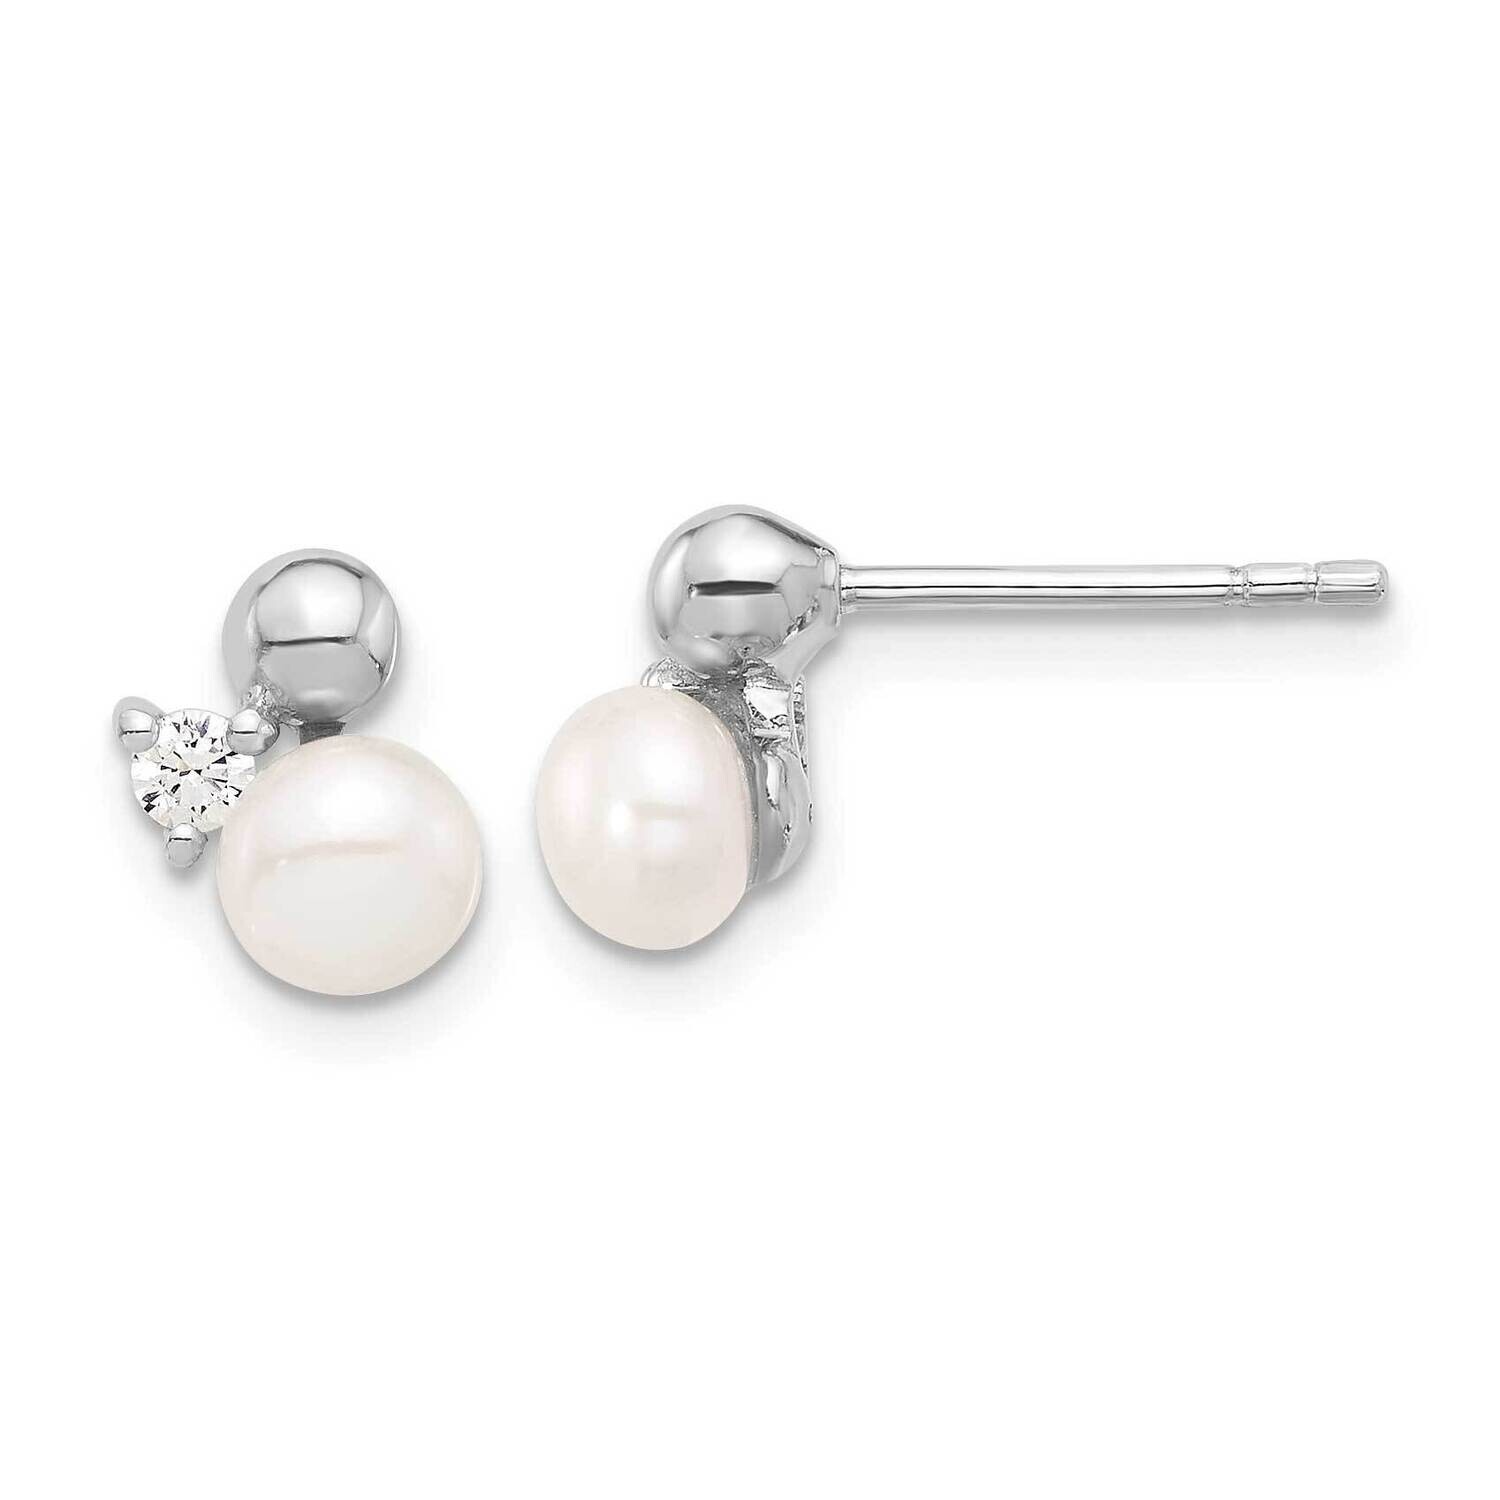 CZ Fwc Pearl Post Earrings Sterling Silver Rhodium-Plated QE16753